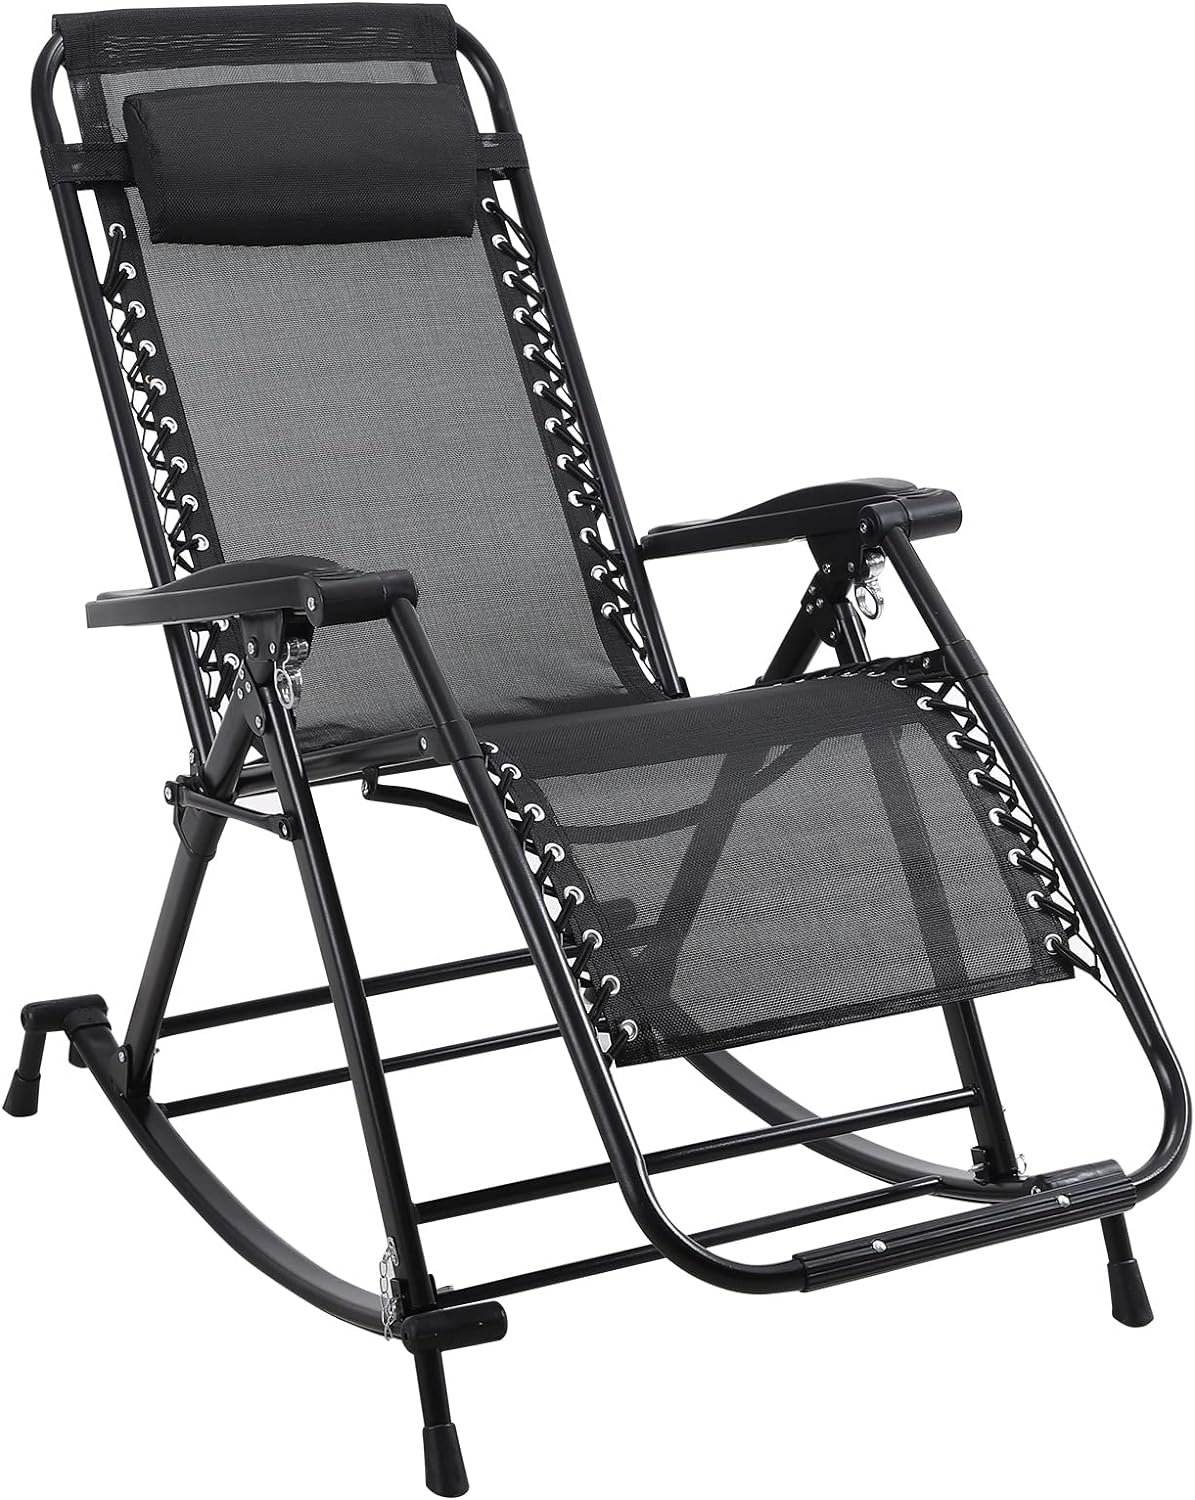 FLOGUOR Outdoor Rocking Chair Review